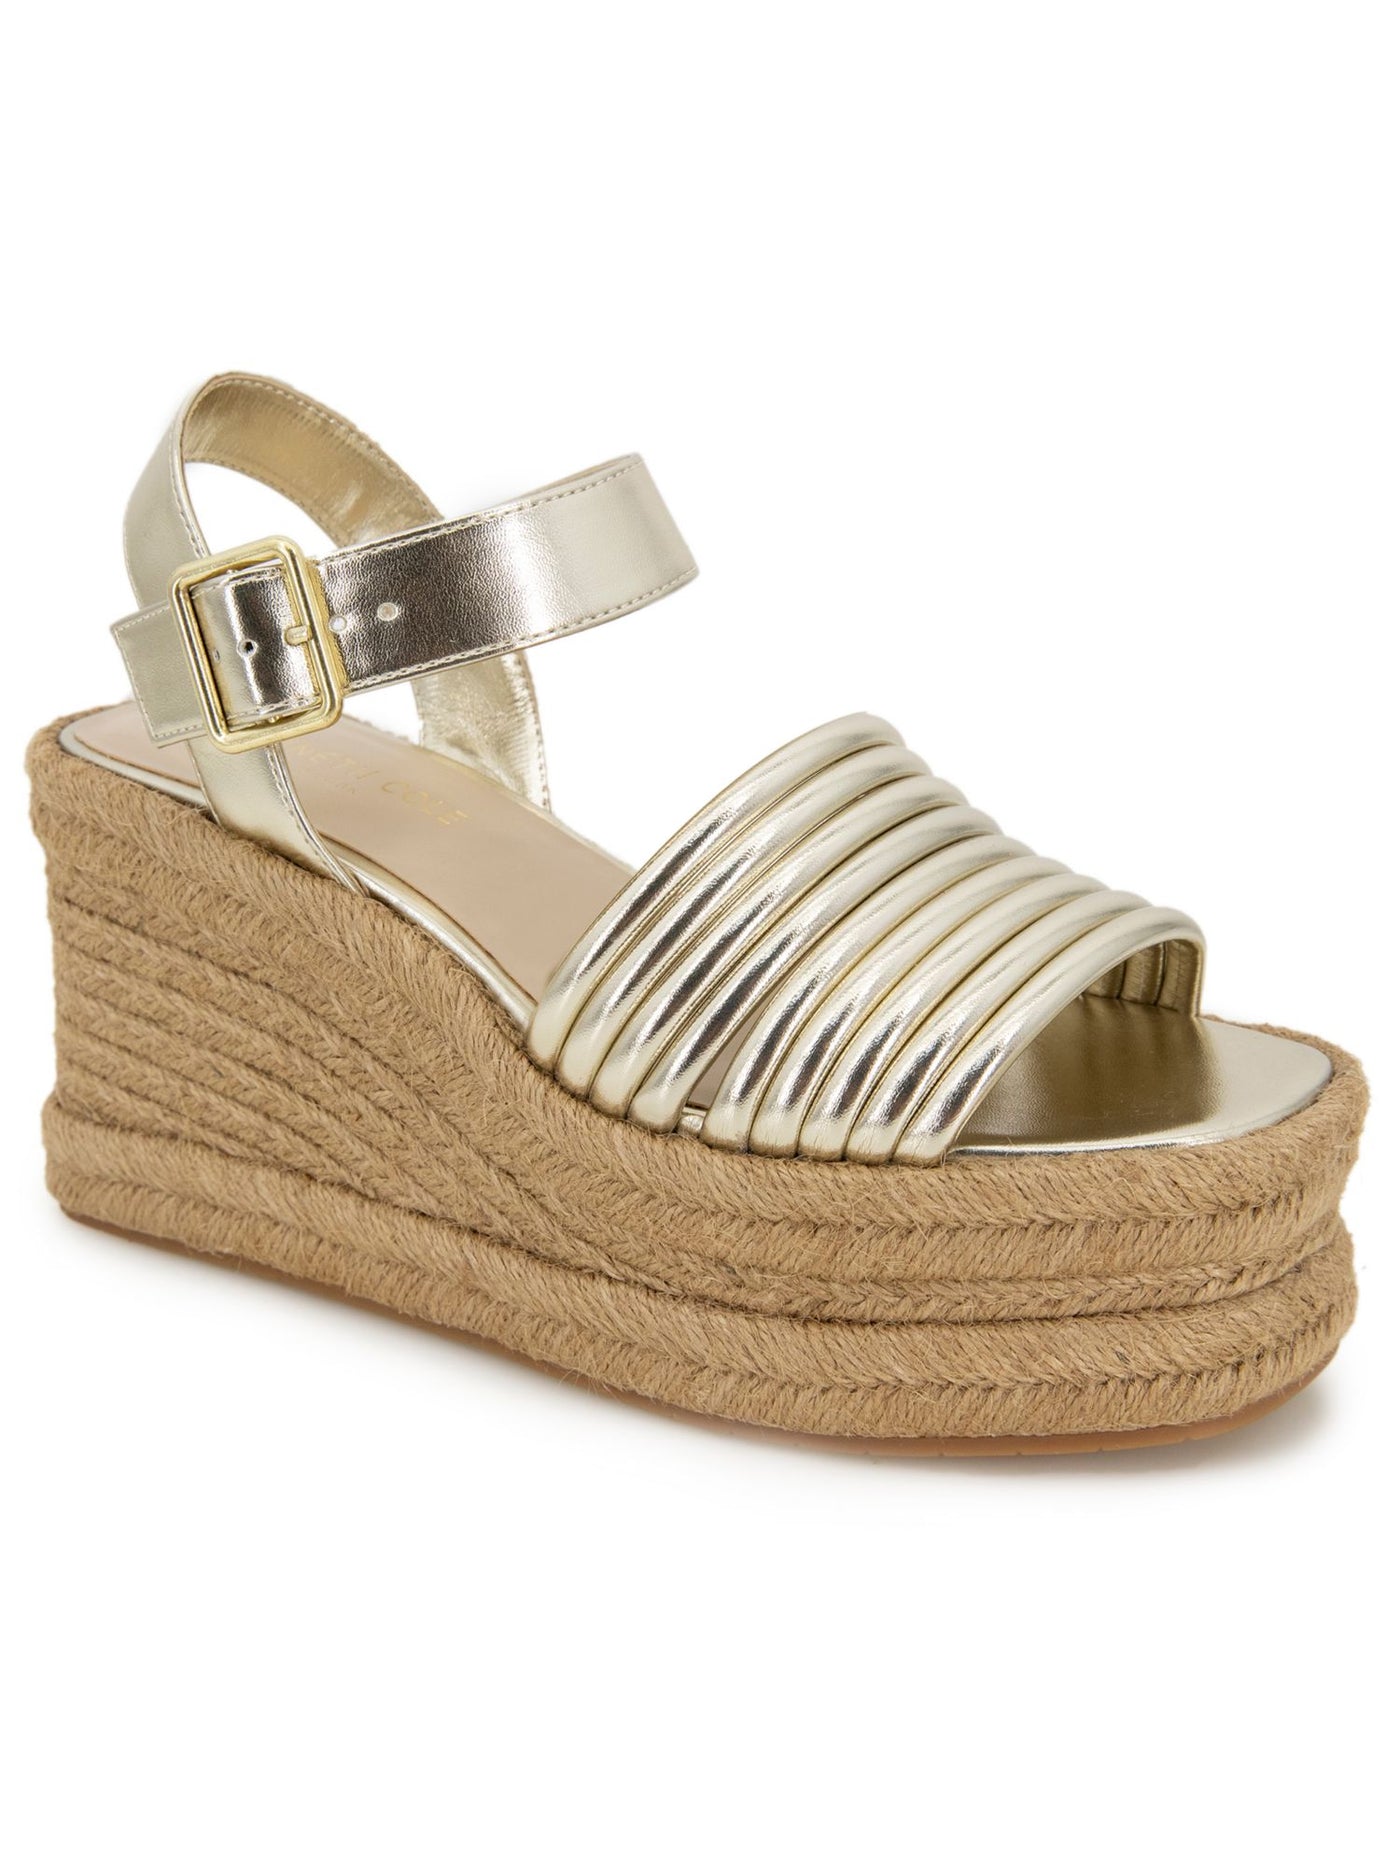 KENNETH COLE NEW YORK Womens Gold 2 Wedge Adjustable Ankle Strap Strappy Padded Shelby Open Toe Wedge Buckle Espadrille Shoes 7 M